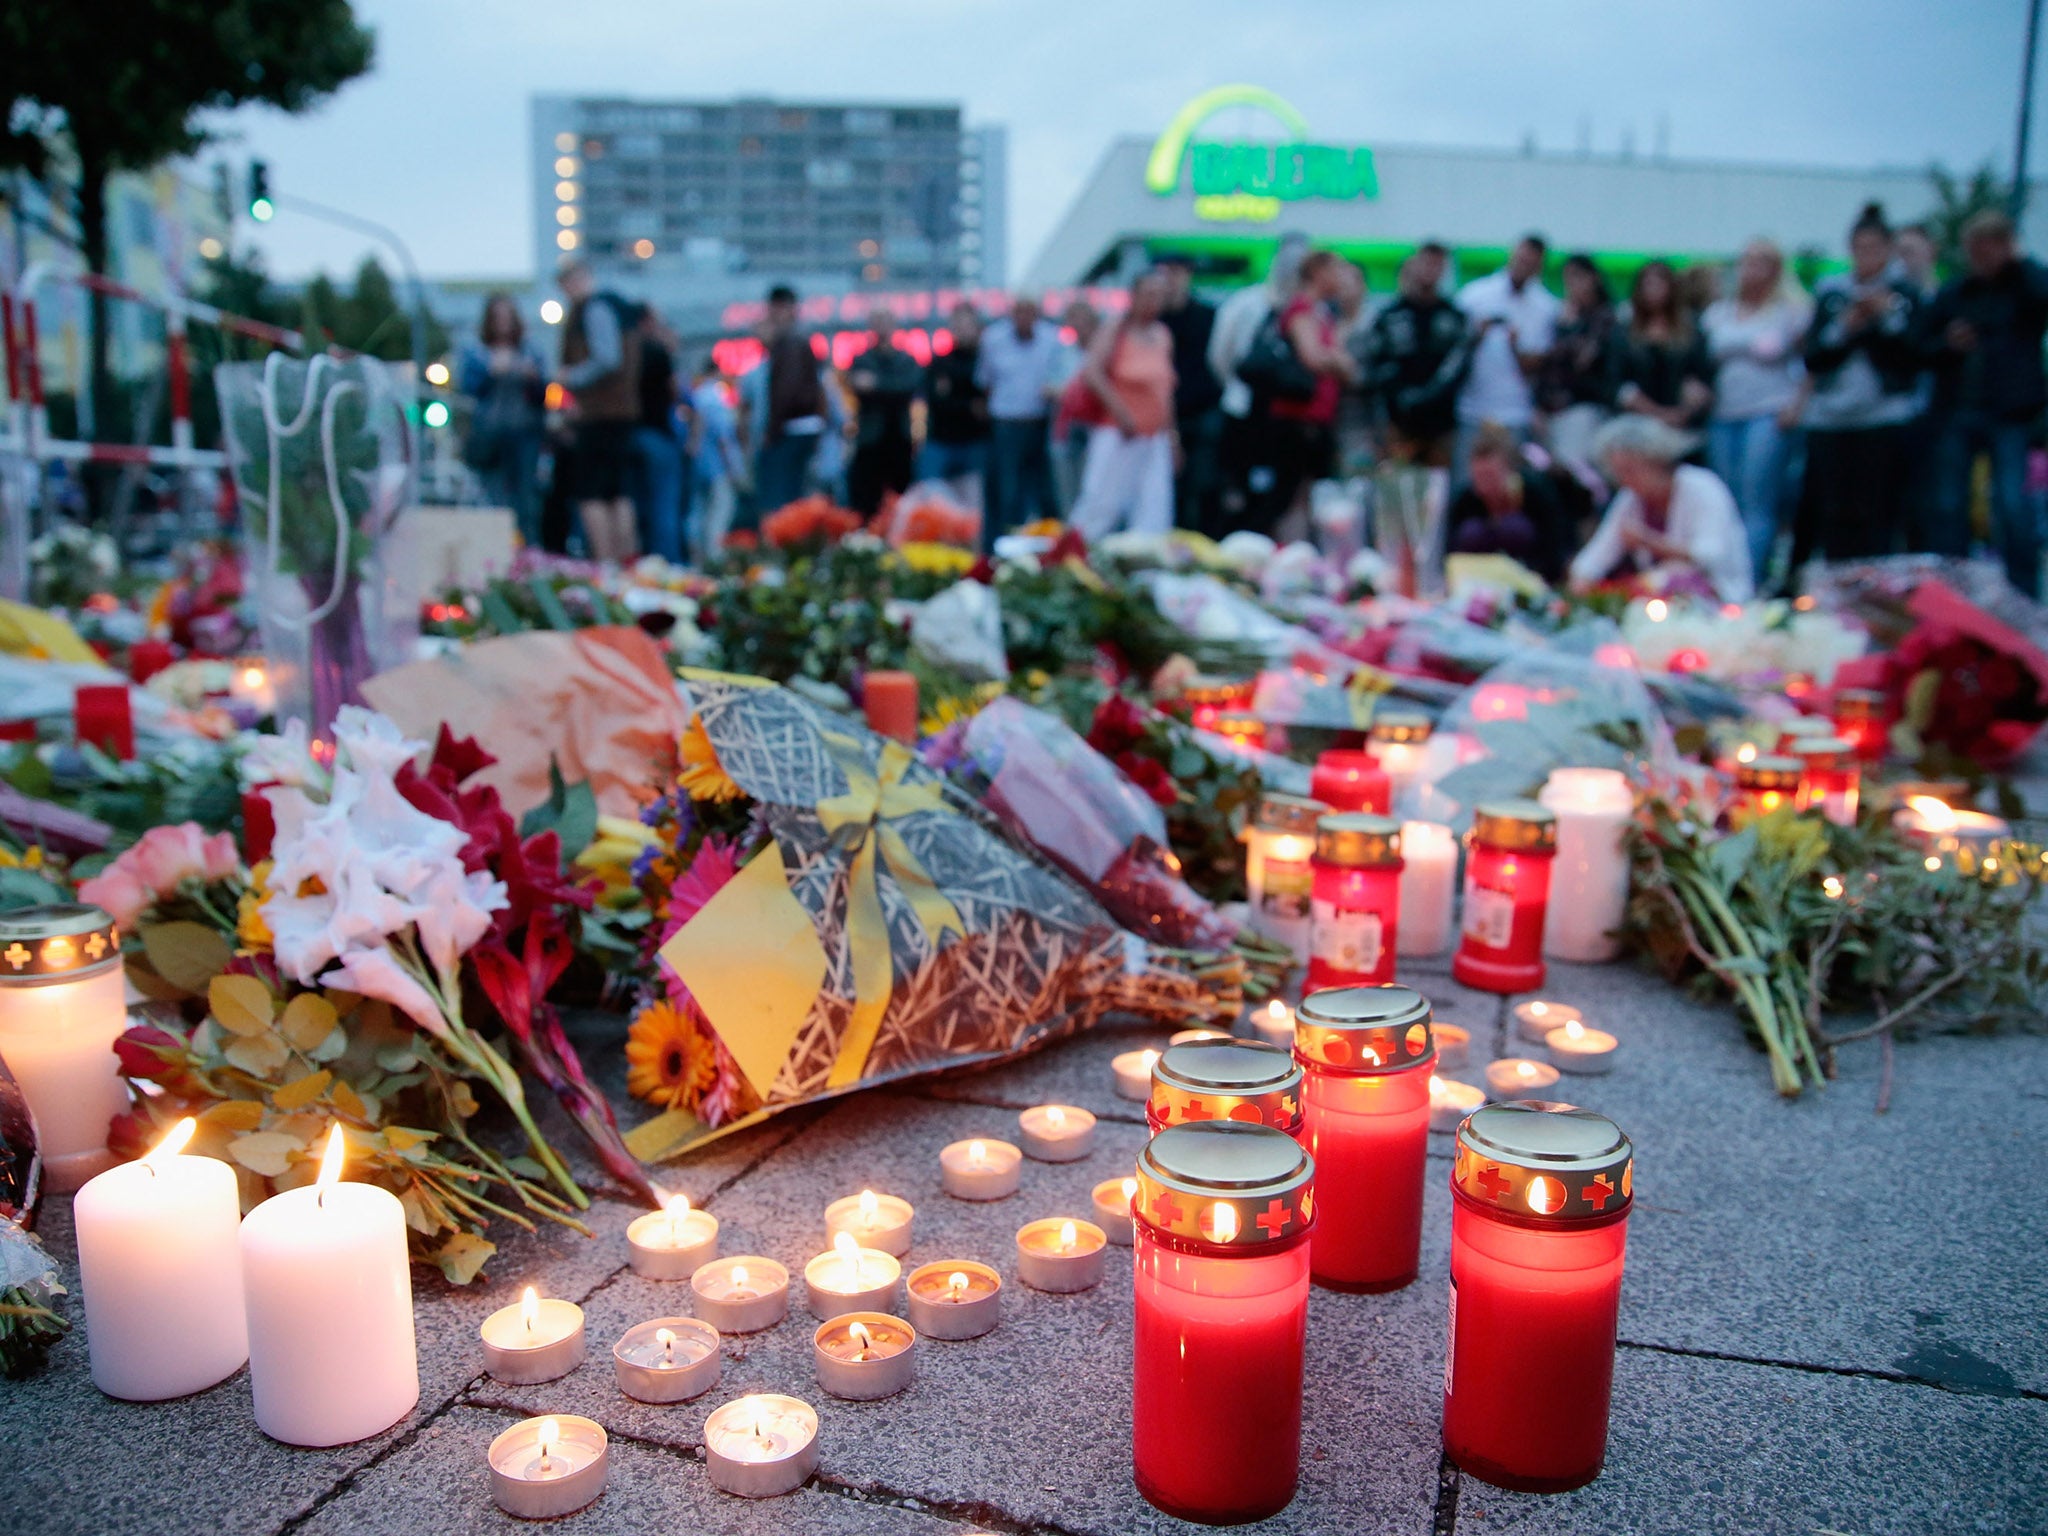 A memorial to those shot by the Munich gunman, who was said to be obsessed with mass shootings